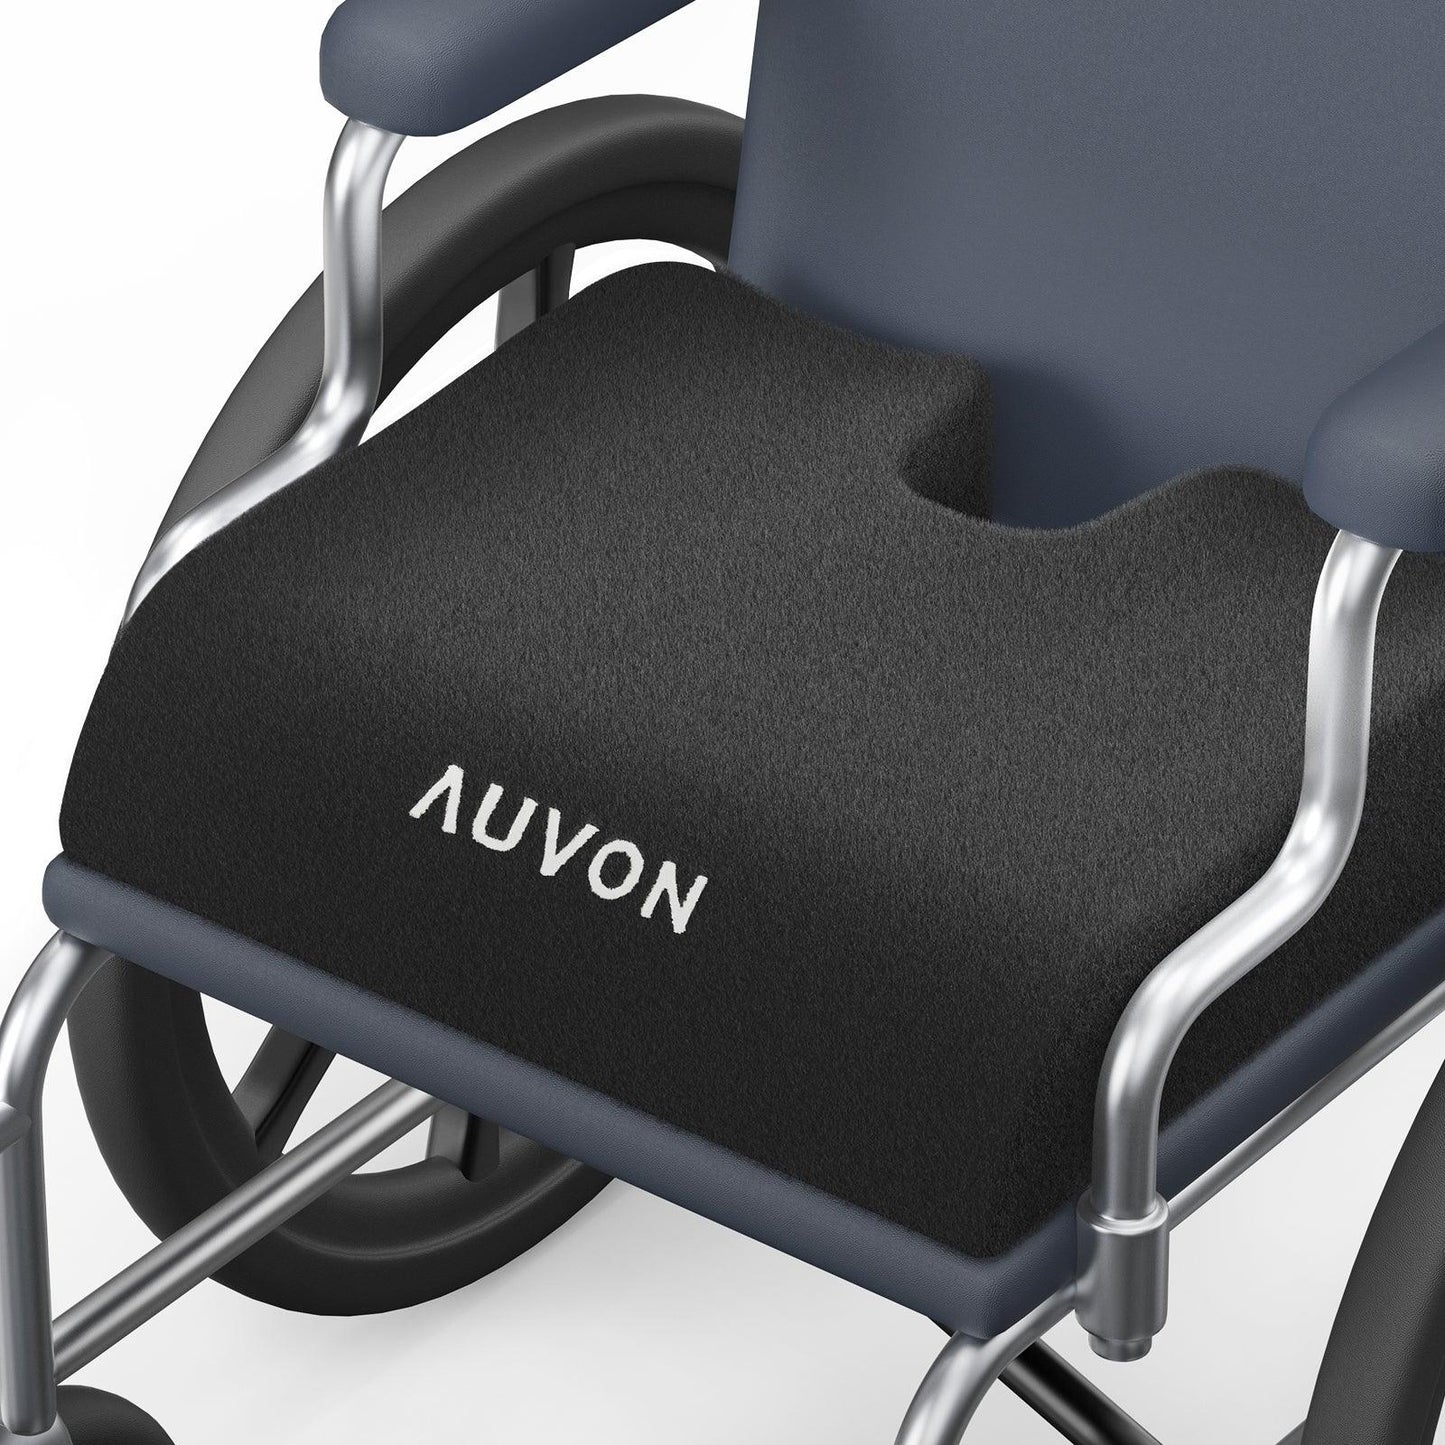 AUVON Wheelchair Seat Cushions (18"x16"x3") for Sciatica, Back, Coccyx, Pressure Sore and Ulcer Pain Relief, Memory Foam Pressure Relief Cushion with Removable Strap, Breathable & Waterproof Fabric - AUVON